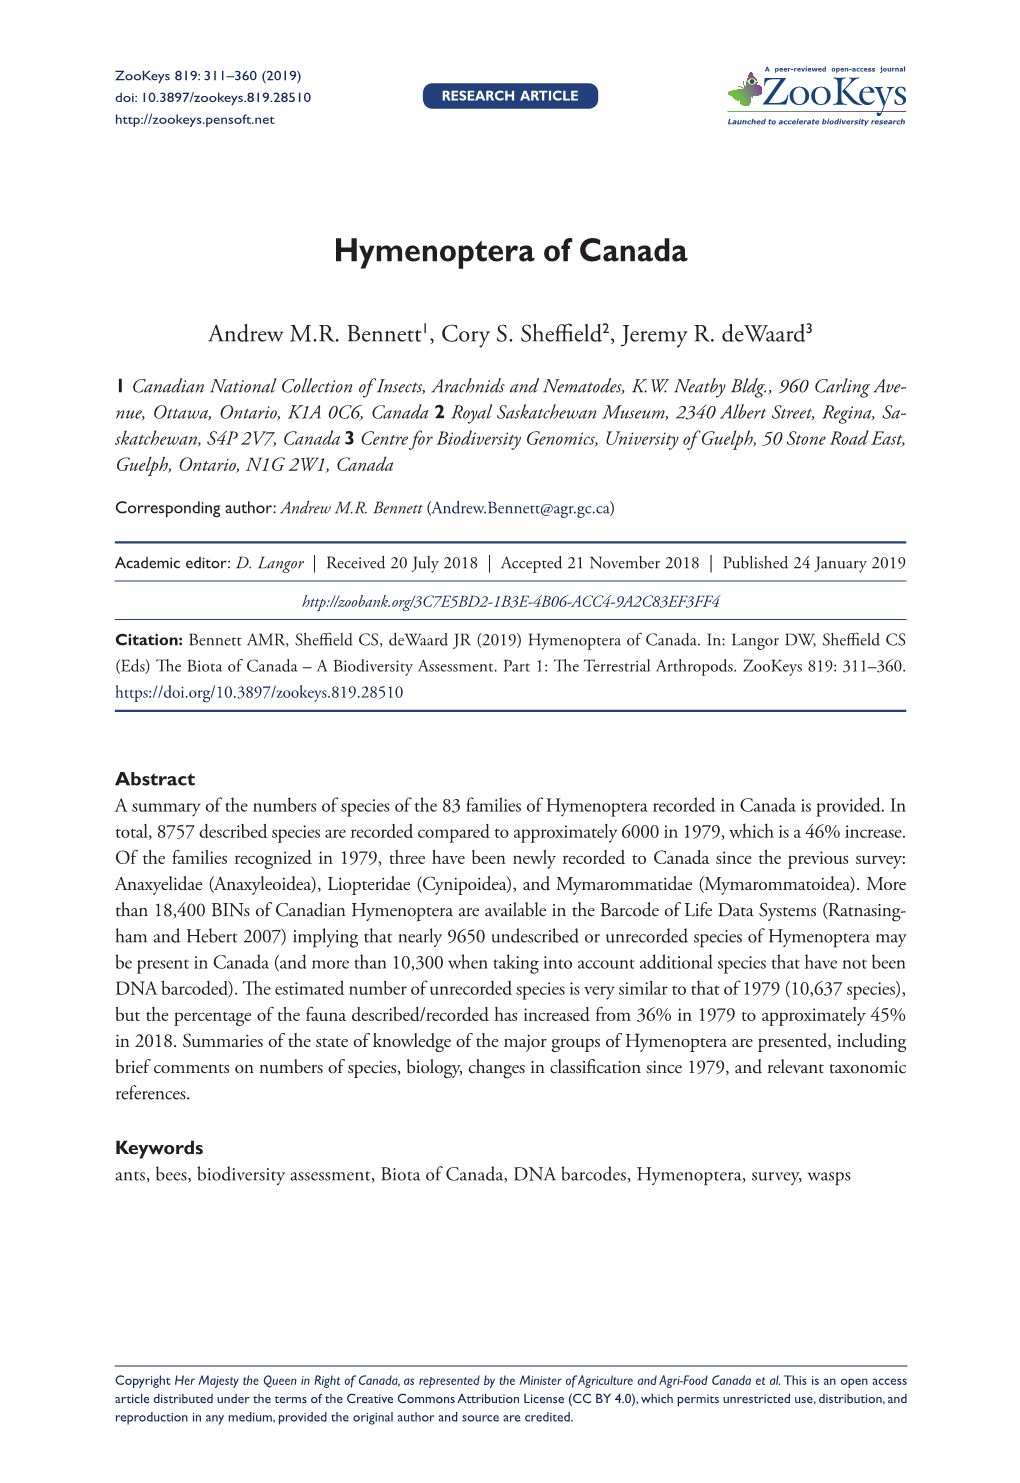 Hymenoptera of Canada 311 Doi: 10.3897/Zookeys.819.28510 RESEARCH ARTICLE Launched to Accelerate Biodiversity Research